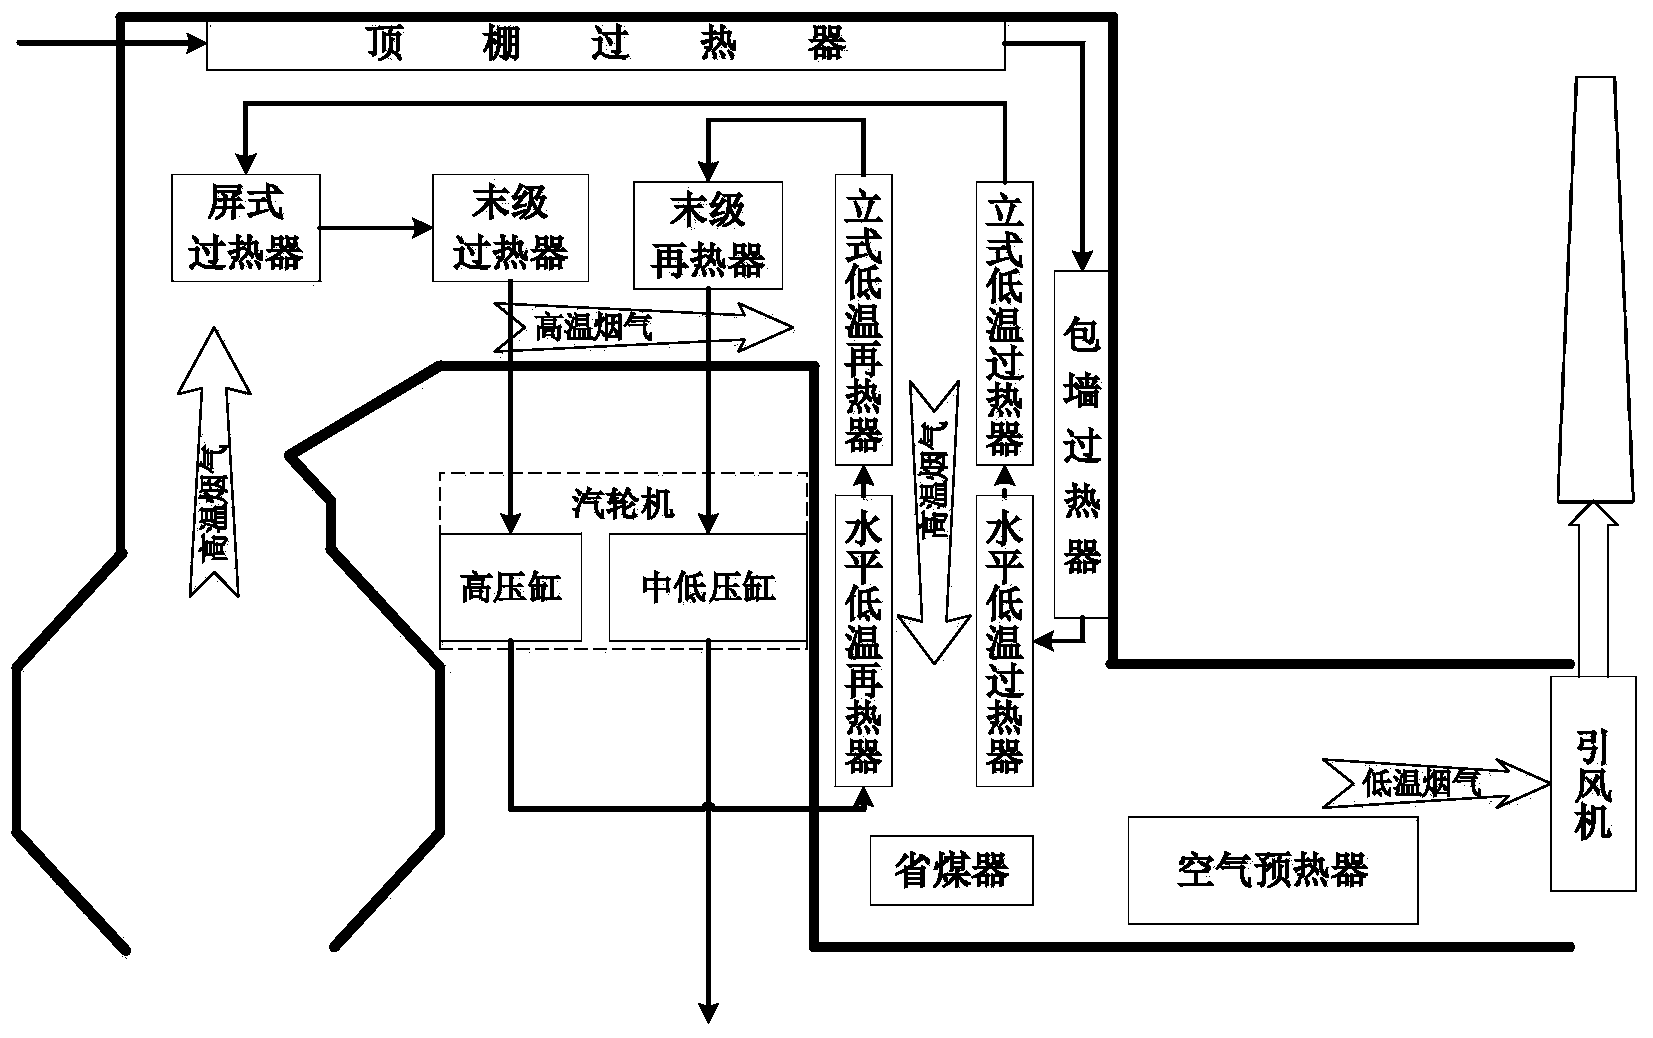 Method for measuring boiler thermal efficiency of coal fired power plant in real time